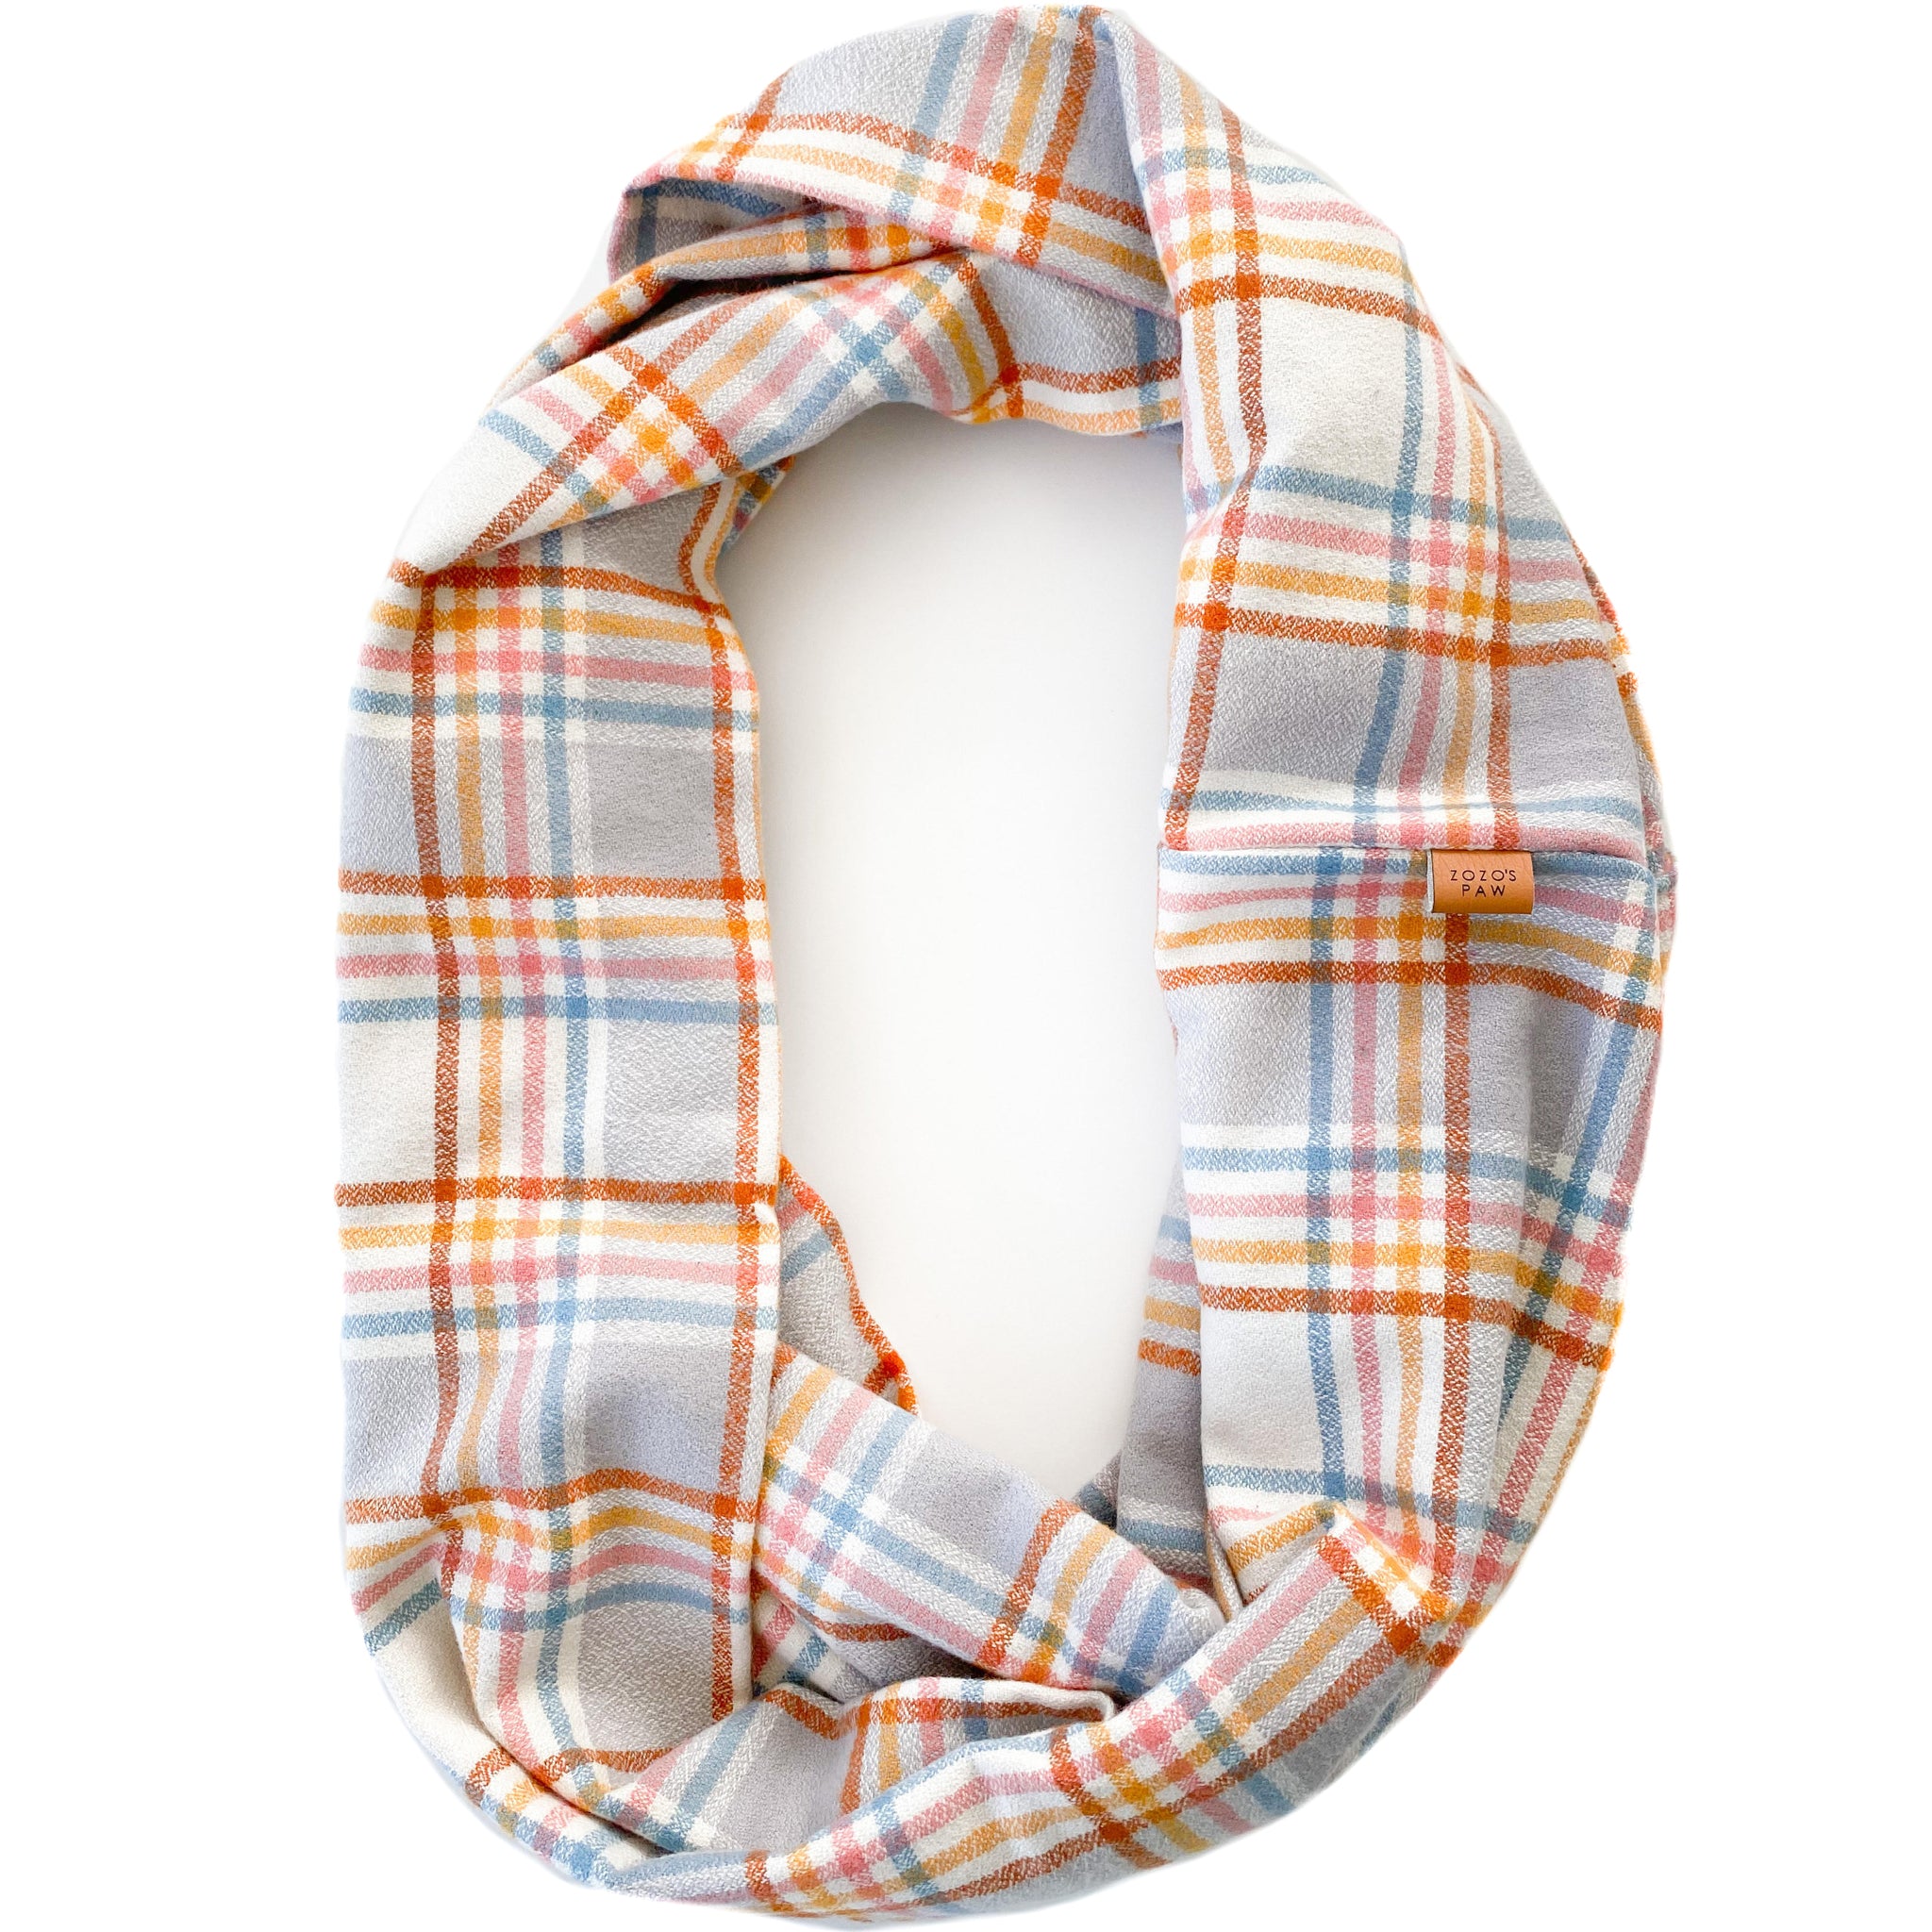 THE CAIRO - Flannel Infinity Scarf